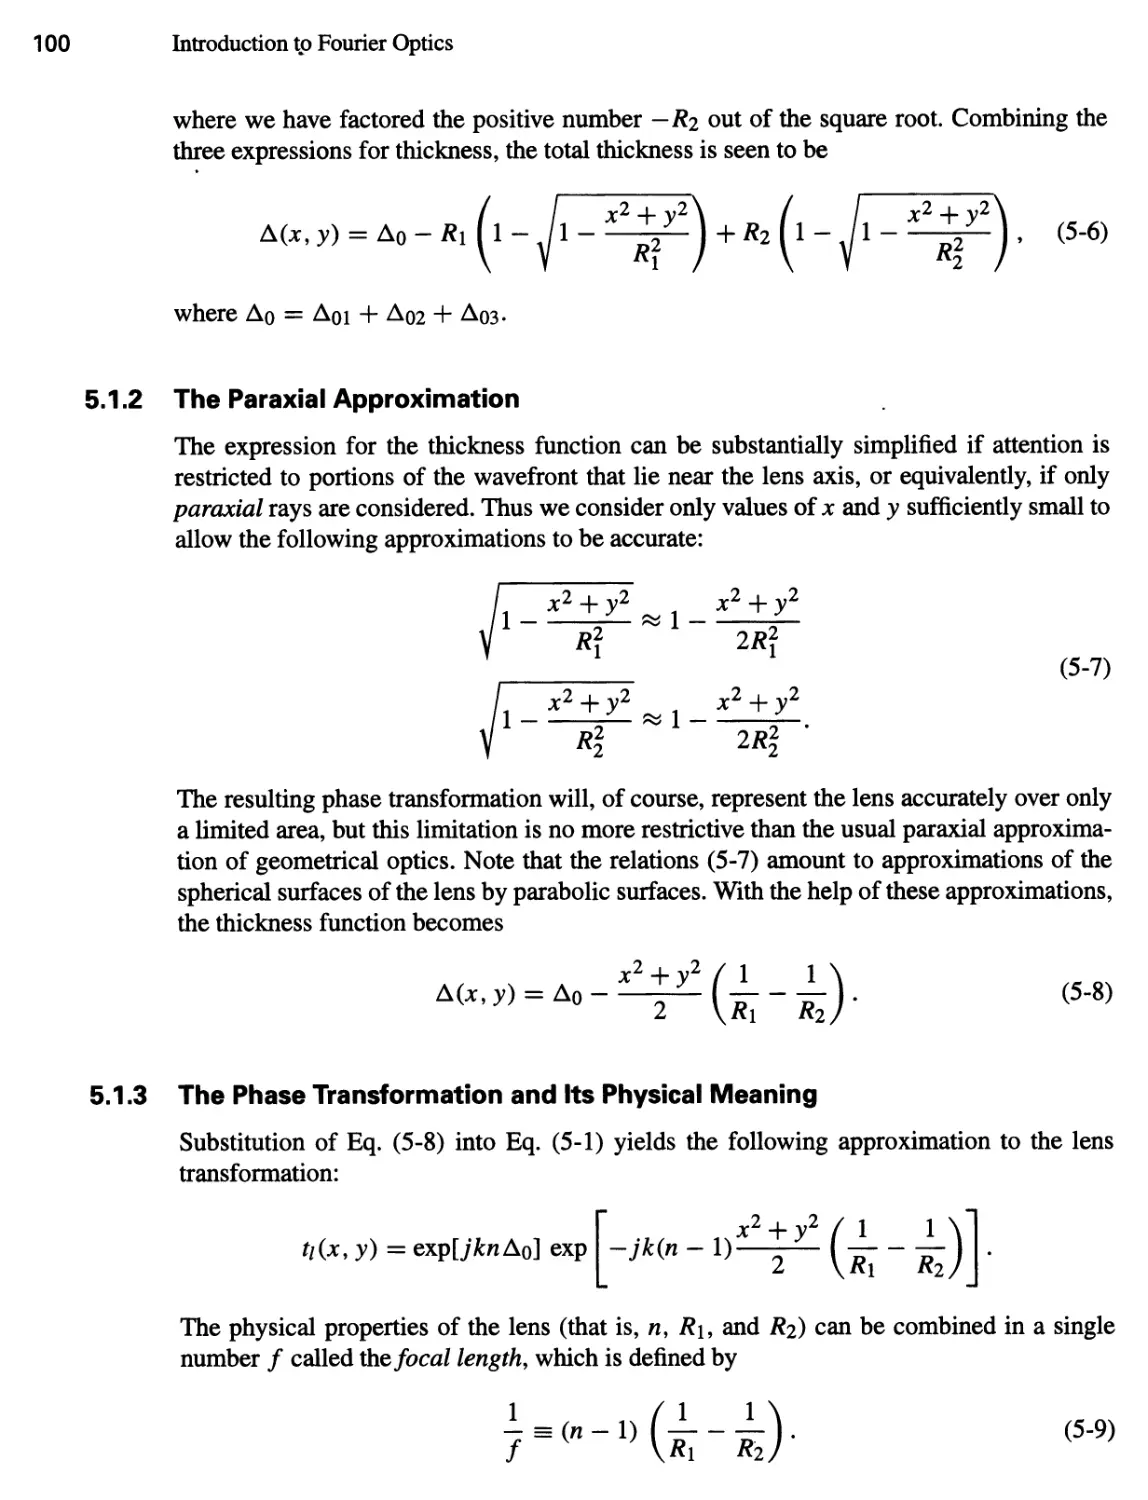 5.1.2 The Paraxial Approximation 100
5.1.3 The Phase Transformation and Its Physical Meaning 100